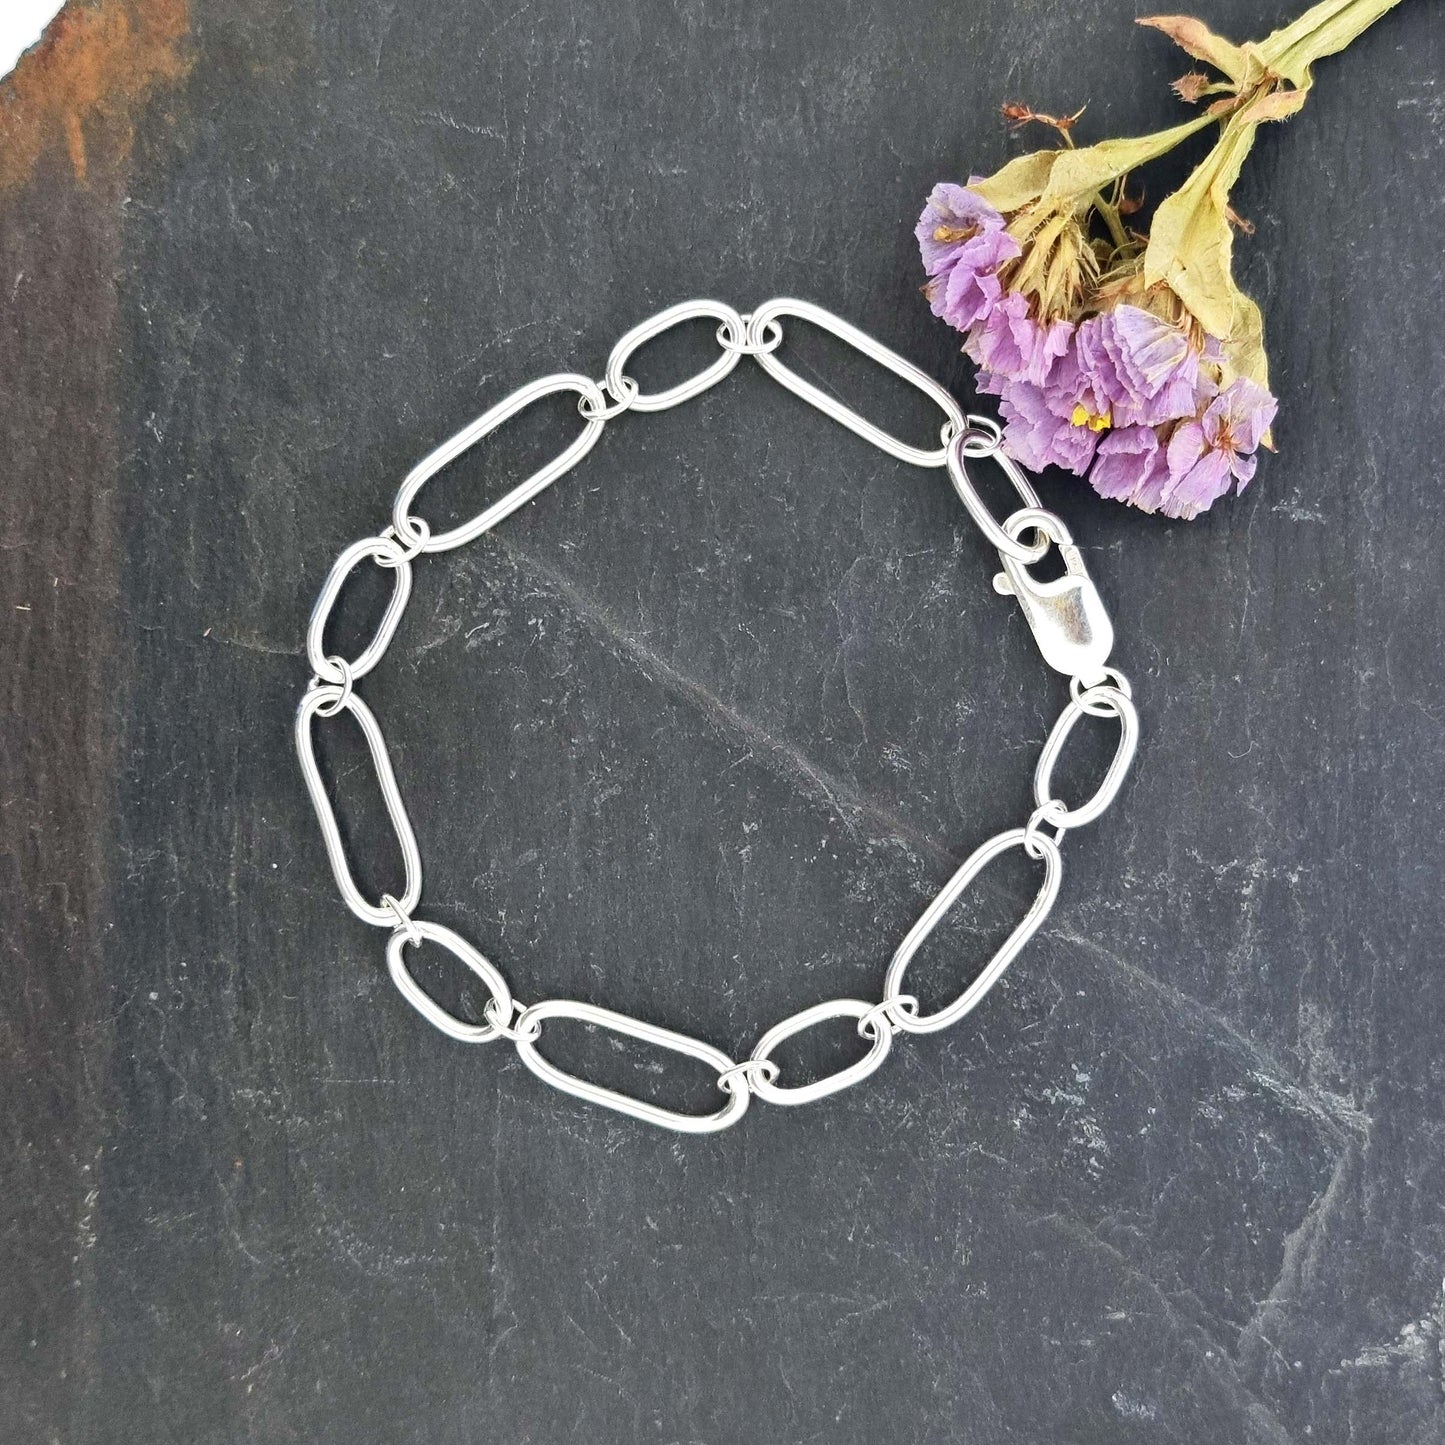 Silver chain bracelet with oblong links of different sizes. Pictured with flowers.